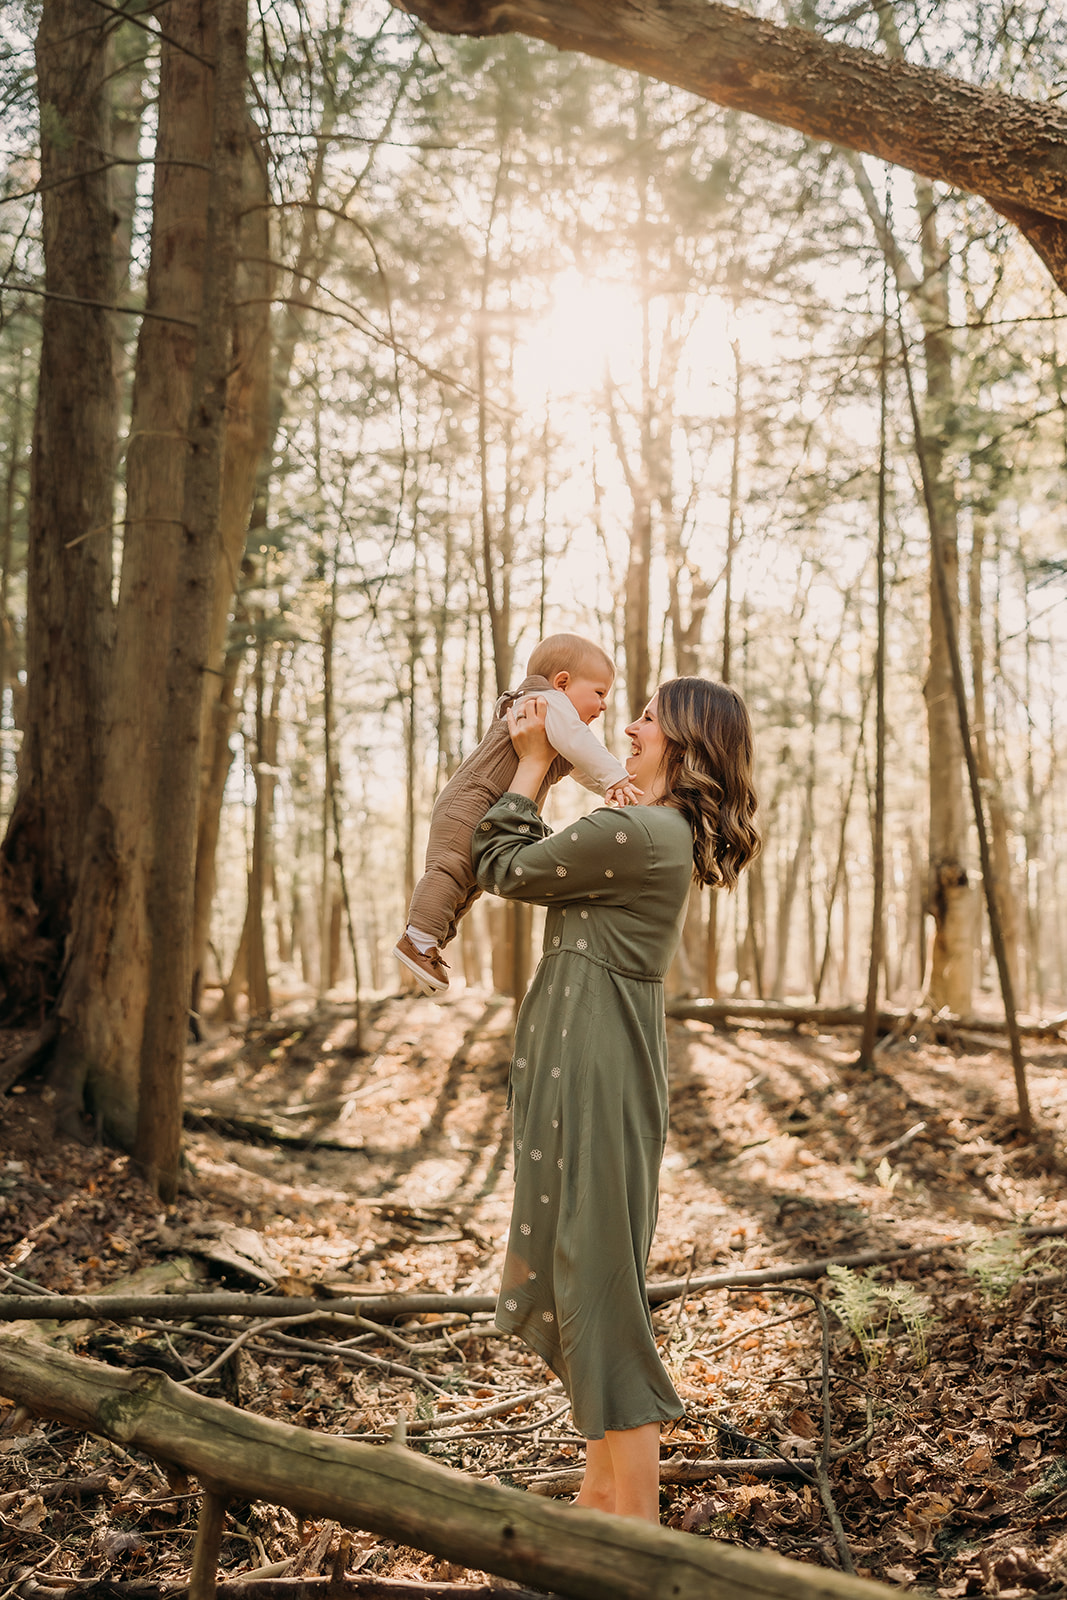 Mother and child bonding amidst the beauty of the forest in a photoshoot